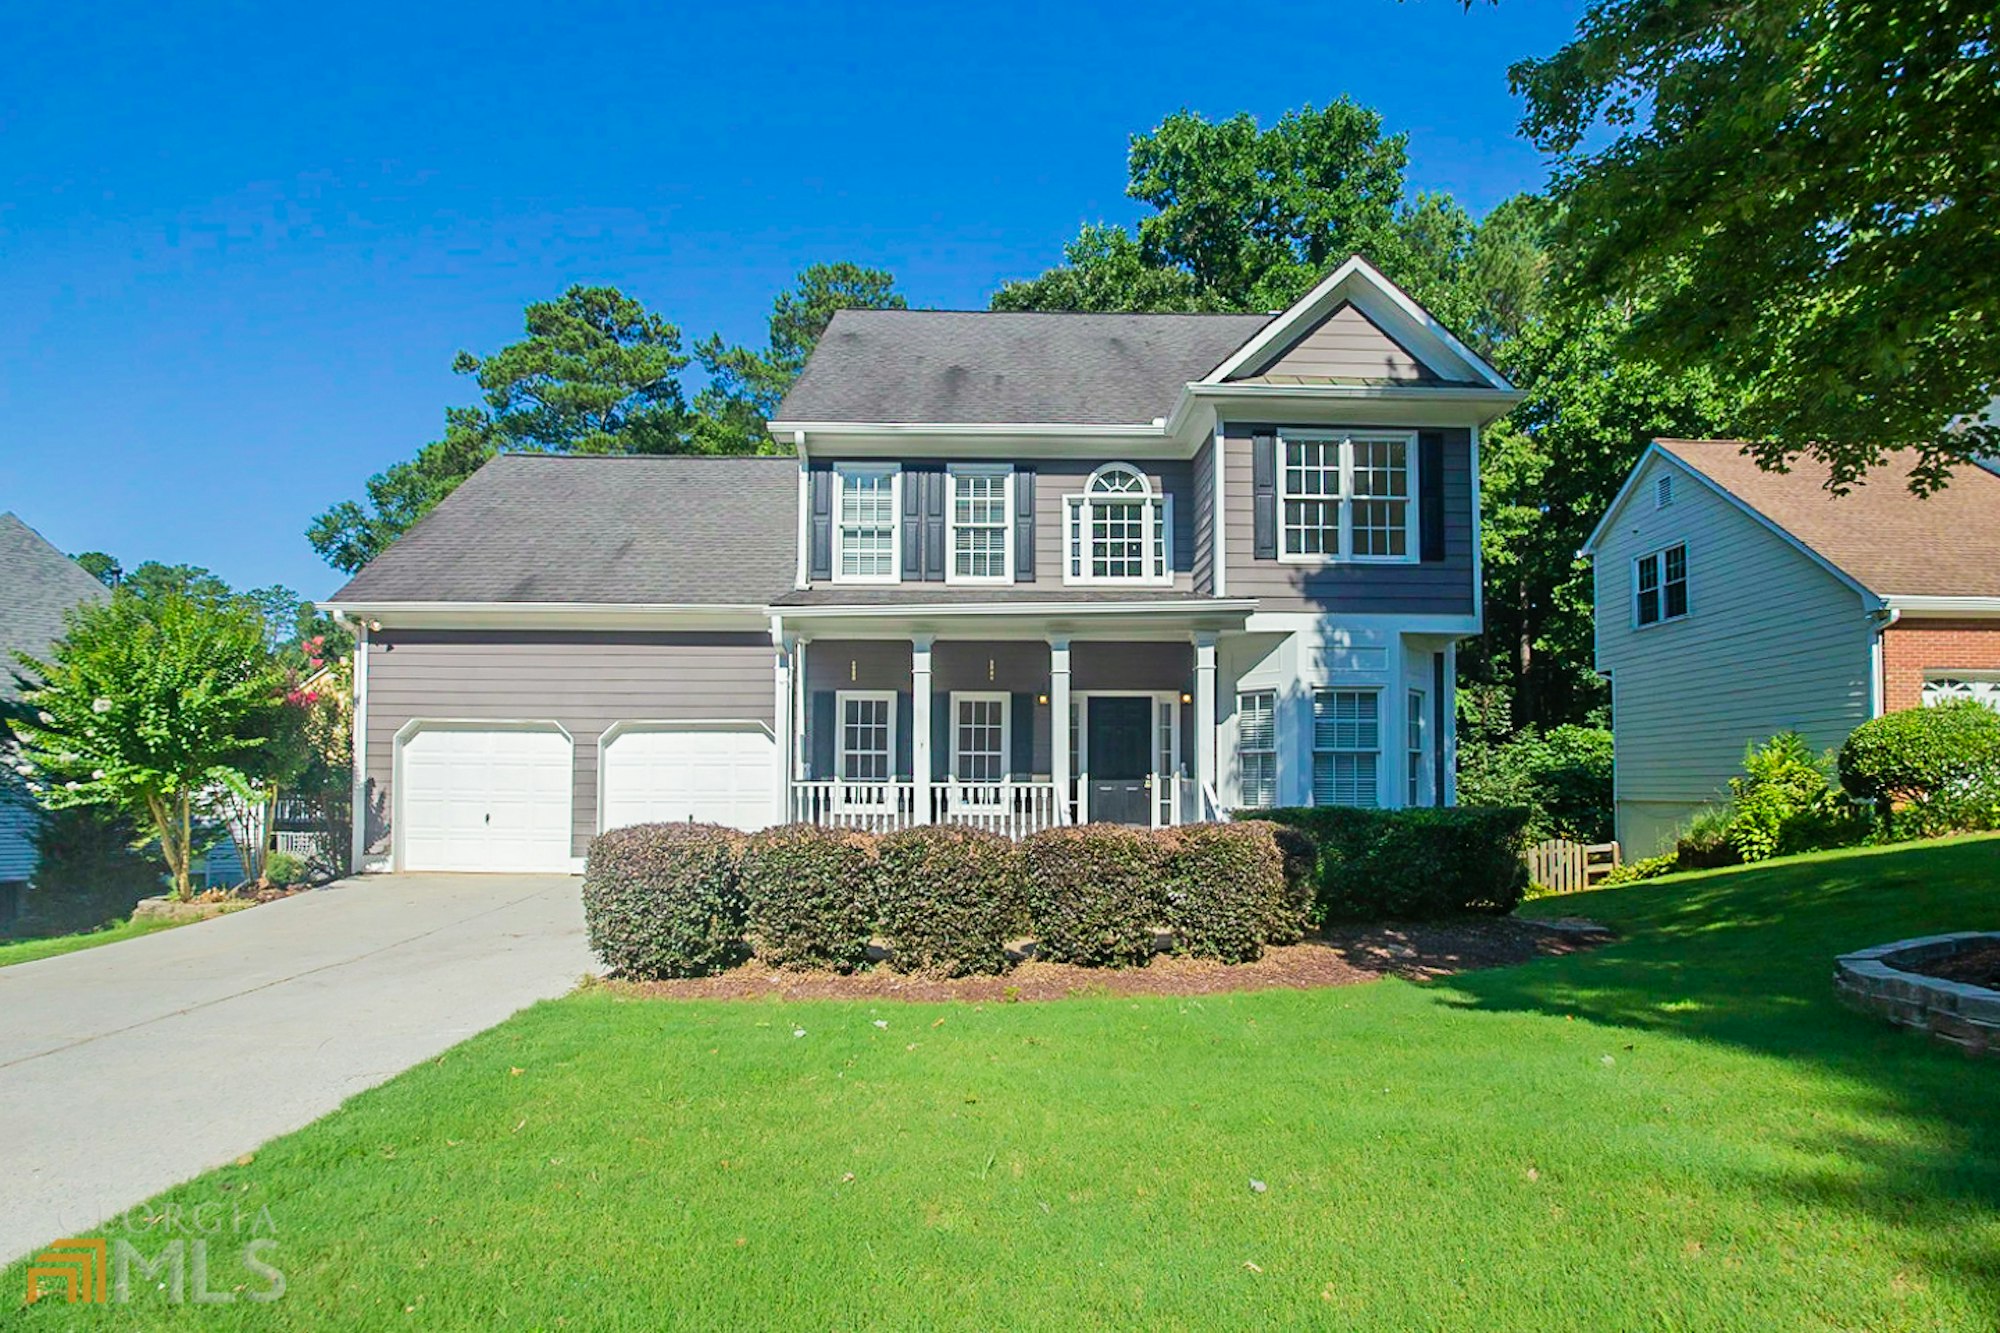 Photo 1 of 27 - 4292 Grand Oaks Dr NW, Kennesaw, GA 30144